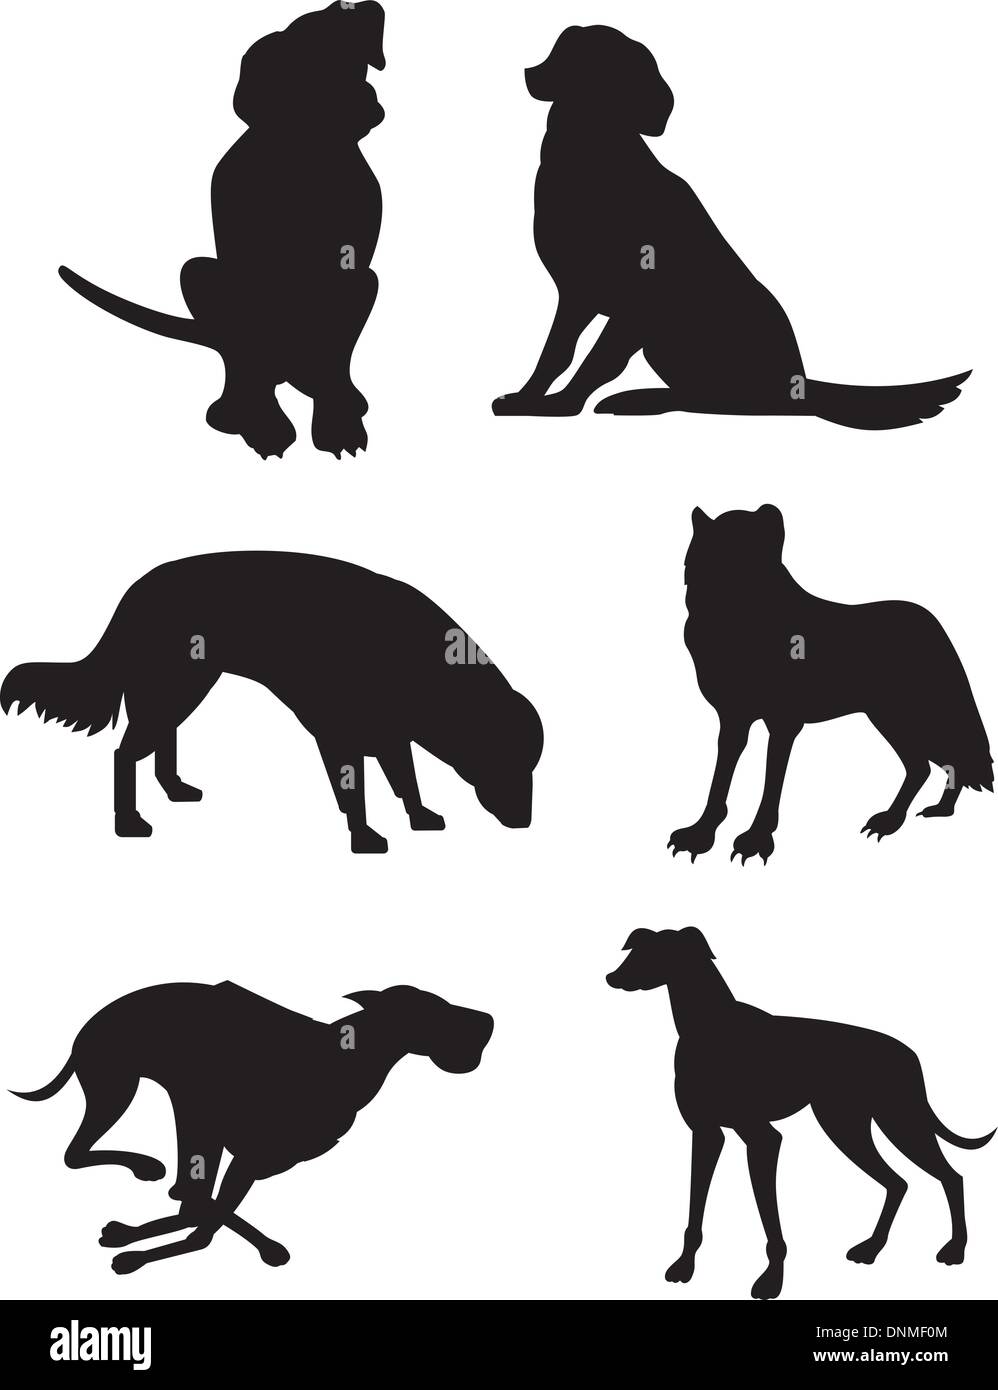 Illustration of different kinds of canines silhouettes isolated on a white background. Stock Vector